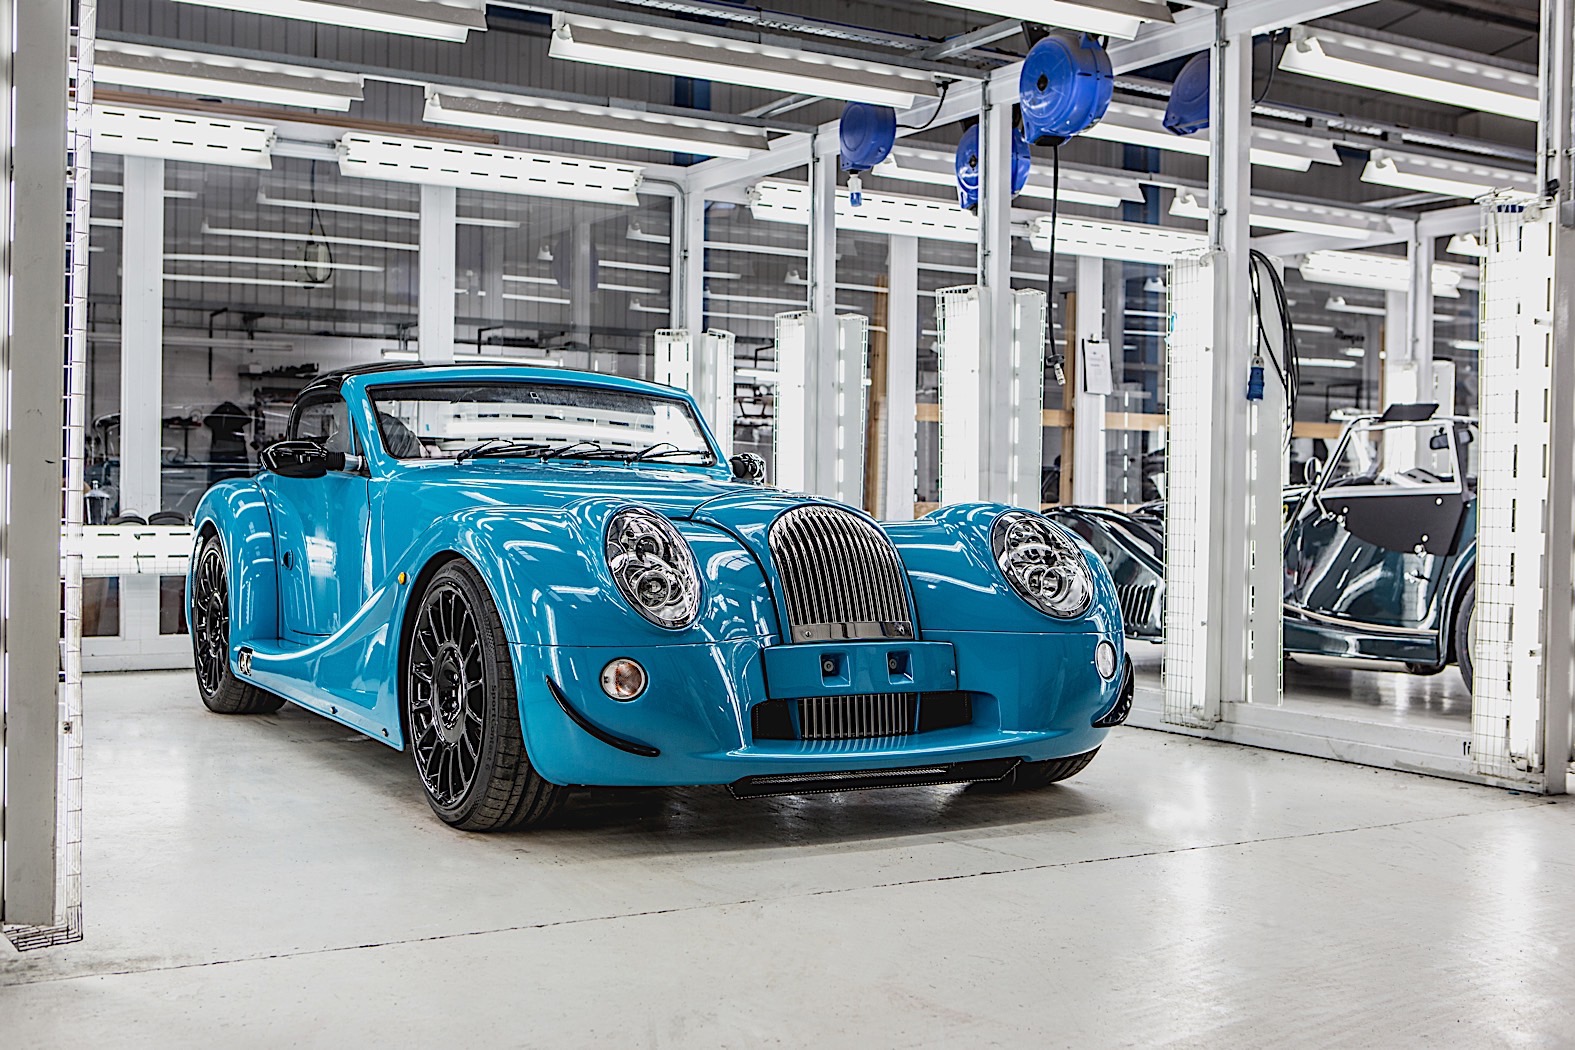 first-of-eight-morgan-aero-gt-rolls-off-assembly-lines-in-blue-124805_1.jpg